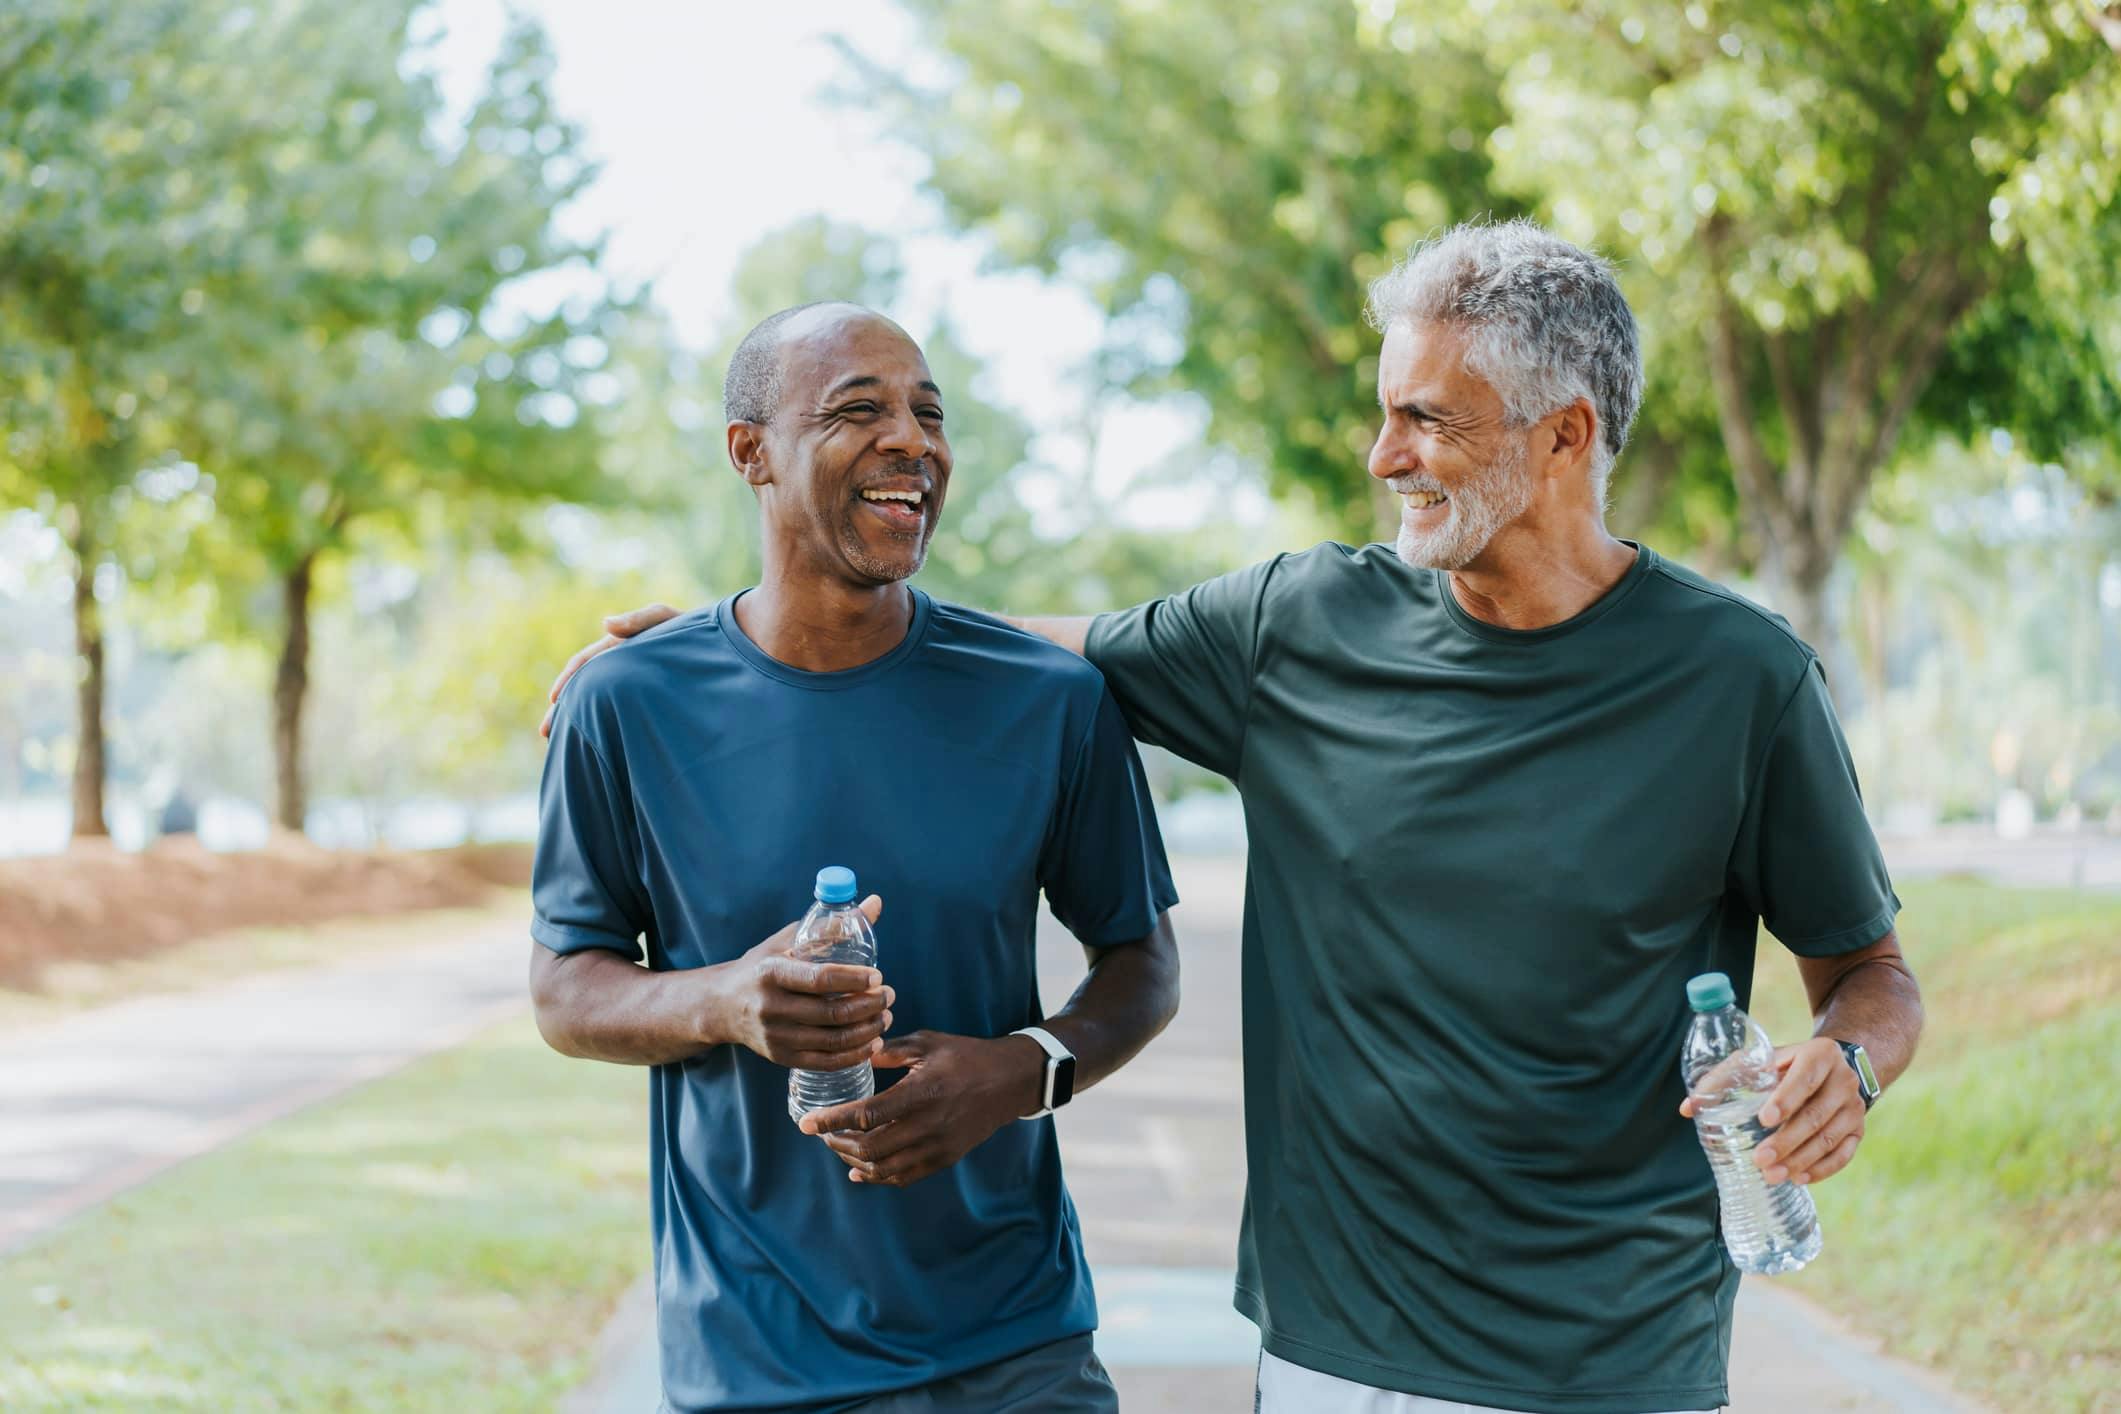 two older men smiling and jogging while holding water bottles